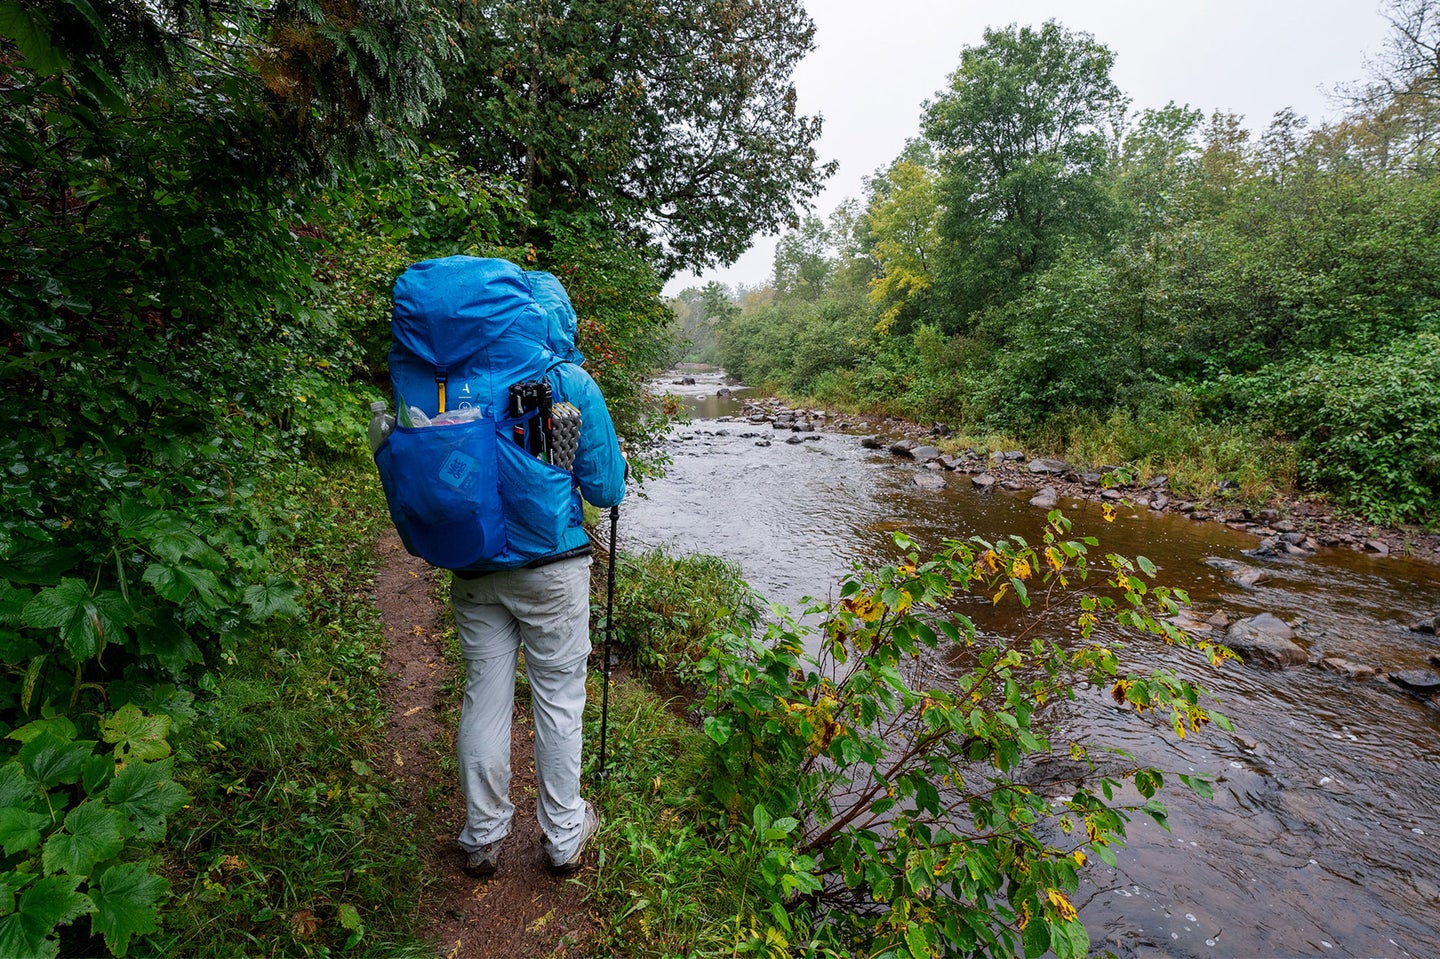 A person stands wearing a packed camera backpack on a backpacking trip next to a river